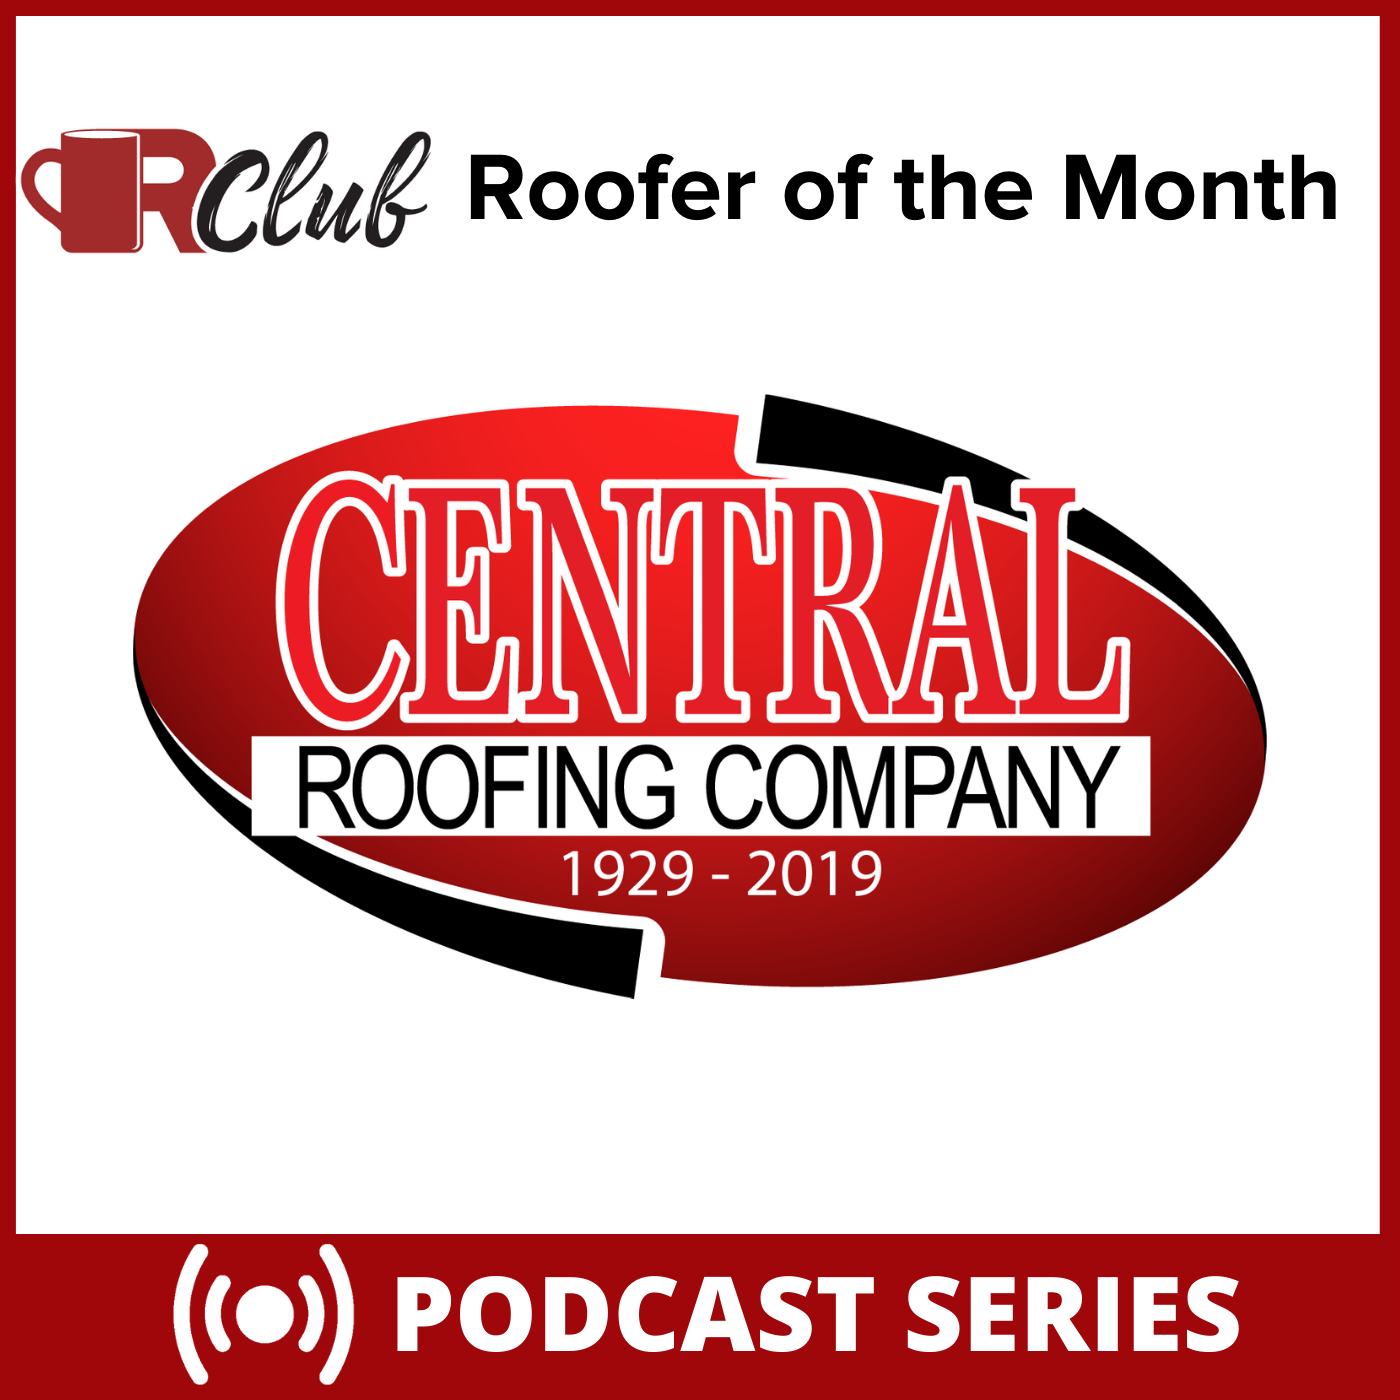 ROTM - June - central Roofing